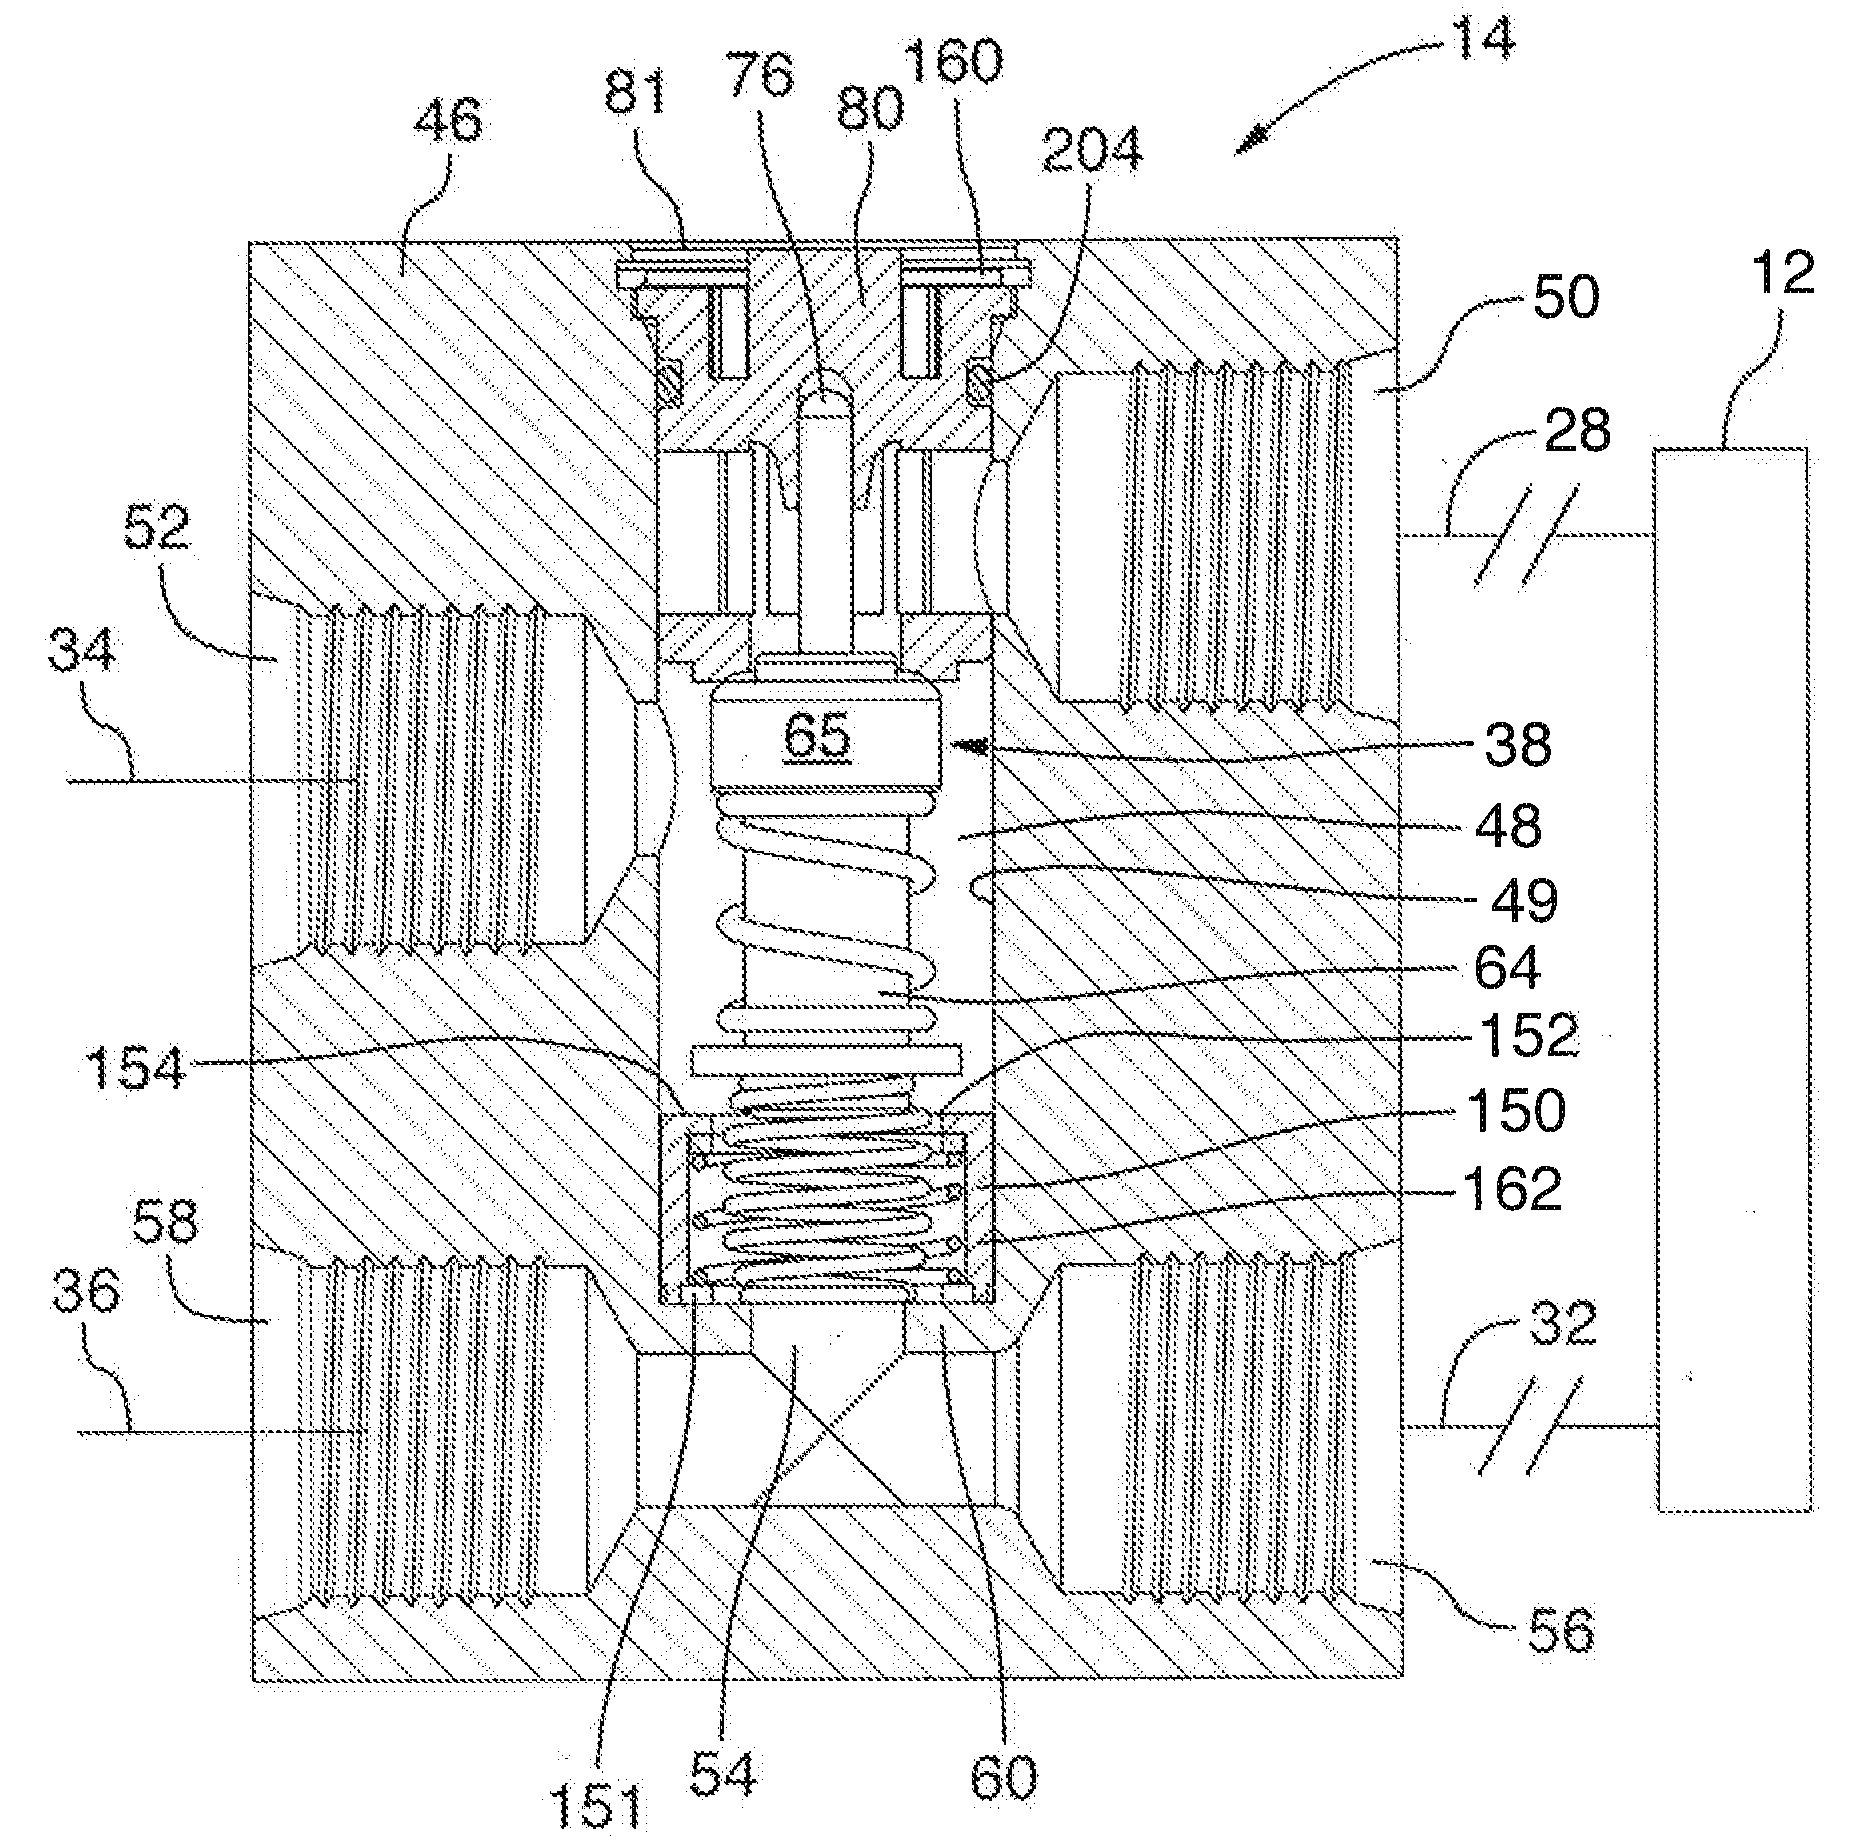 Thermal bypass valve with pressure relief capability